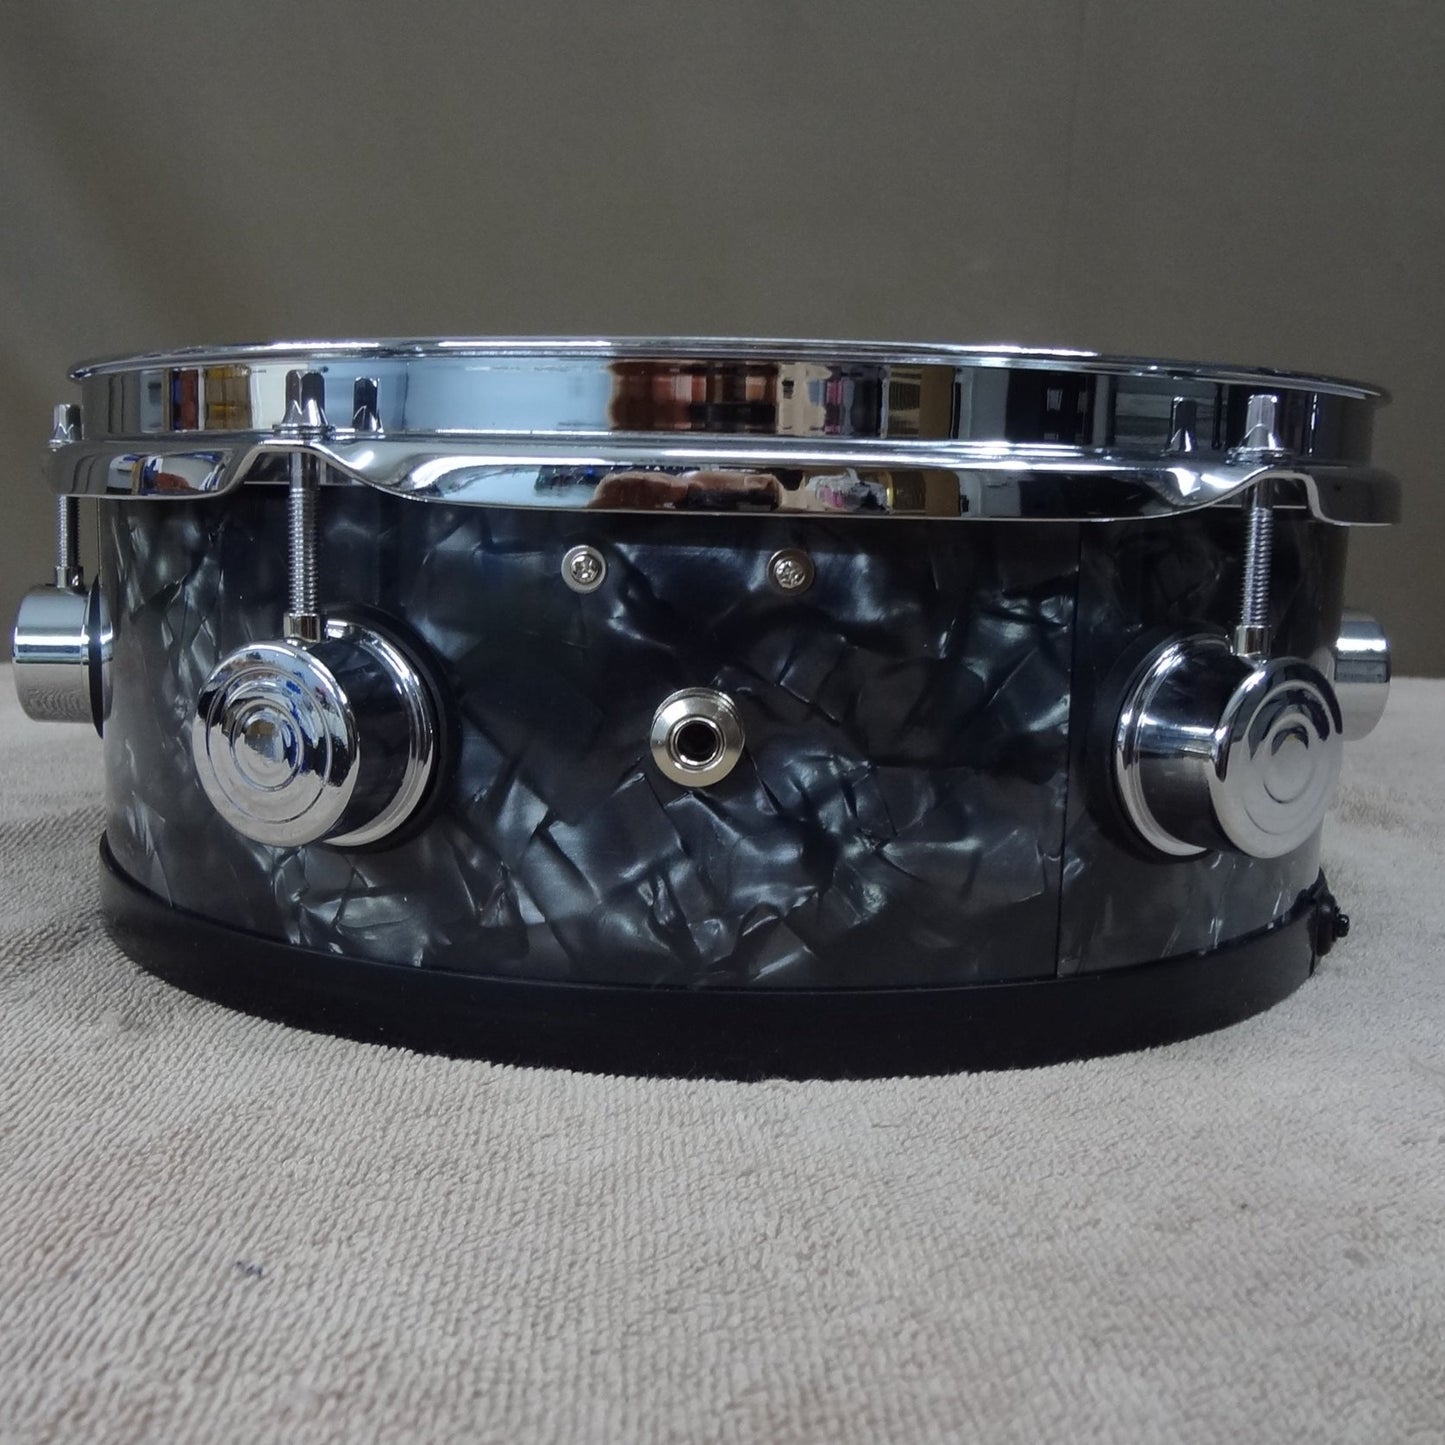 New 12 Inch Custom Electronic Snare Drum - Black Pearl - DW Style Lugs